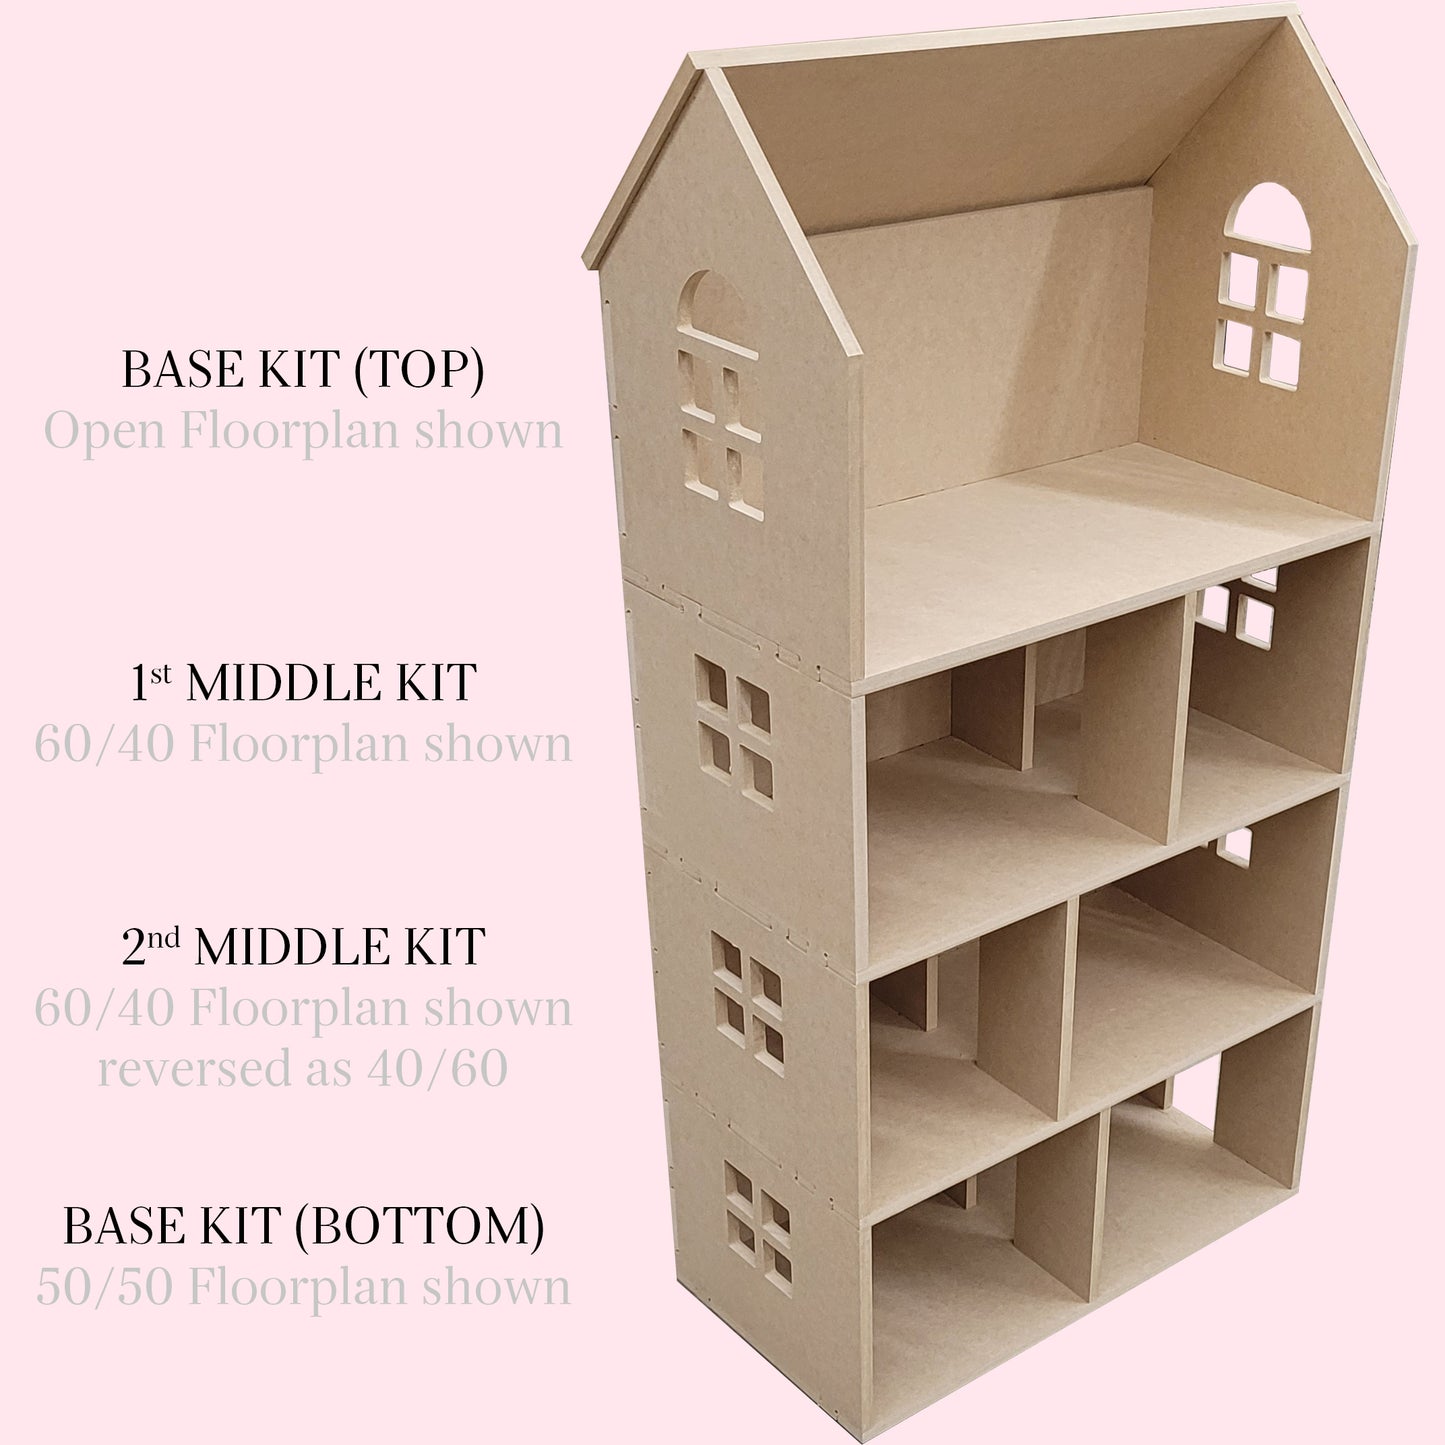 "Morning Glory" One Inch Scale (1:12) Modular, Customizable, and Stackable Dollhouse Kit